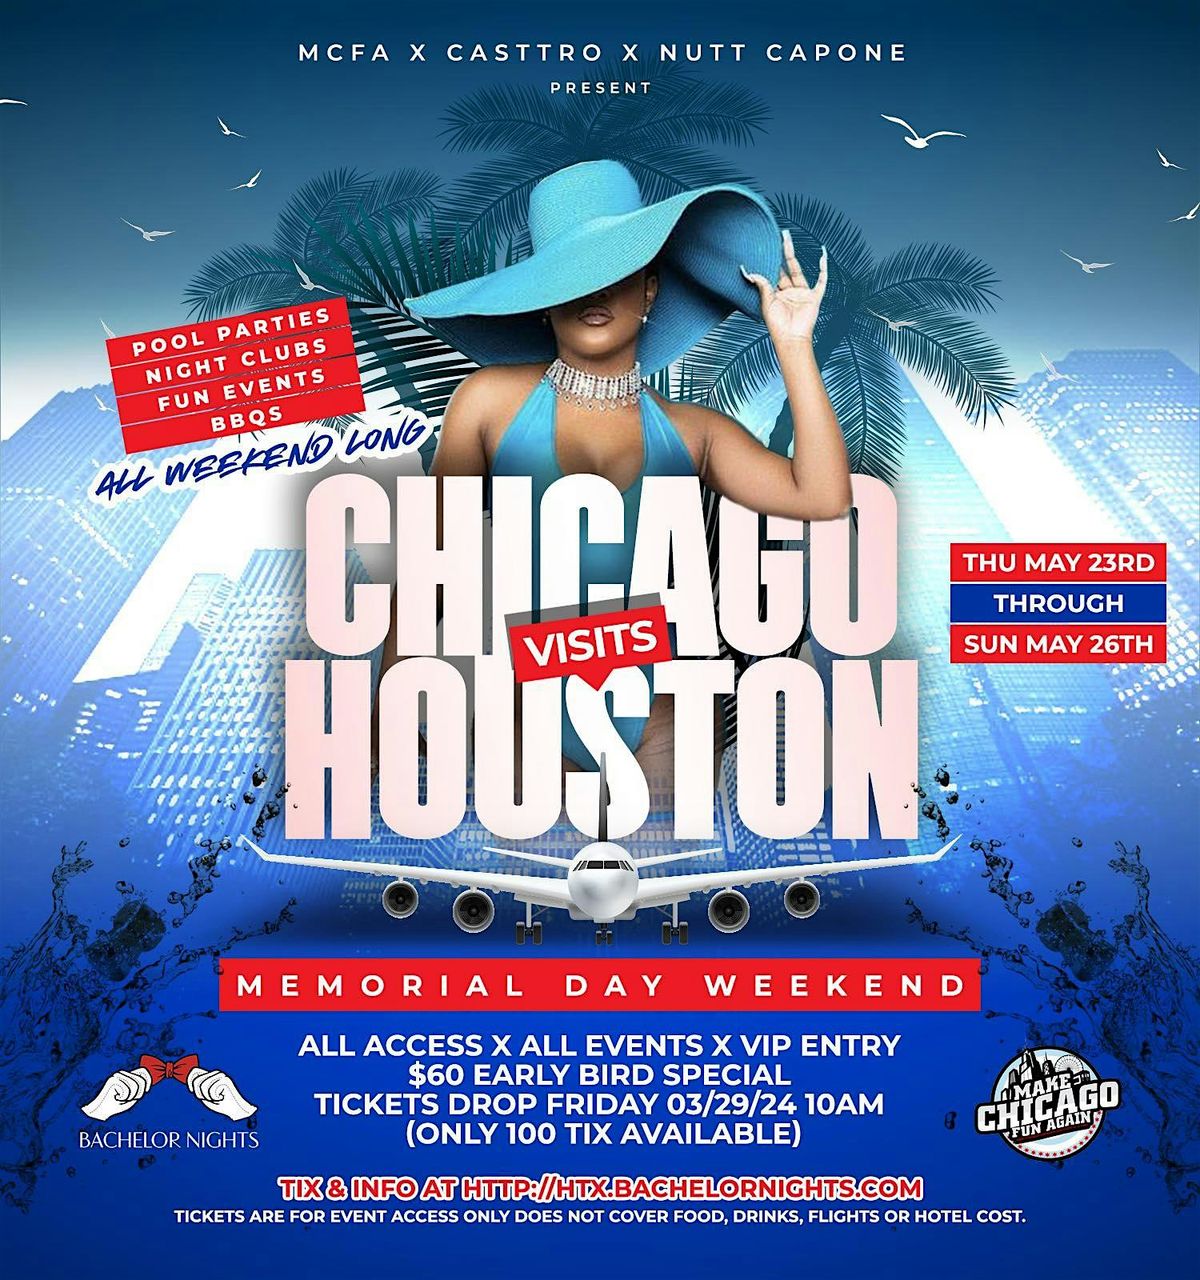 Chicago Visits Houston : Memorial Day Weekend